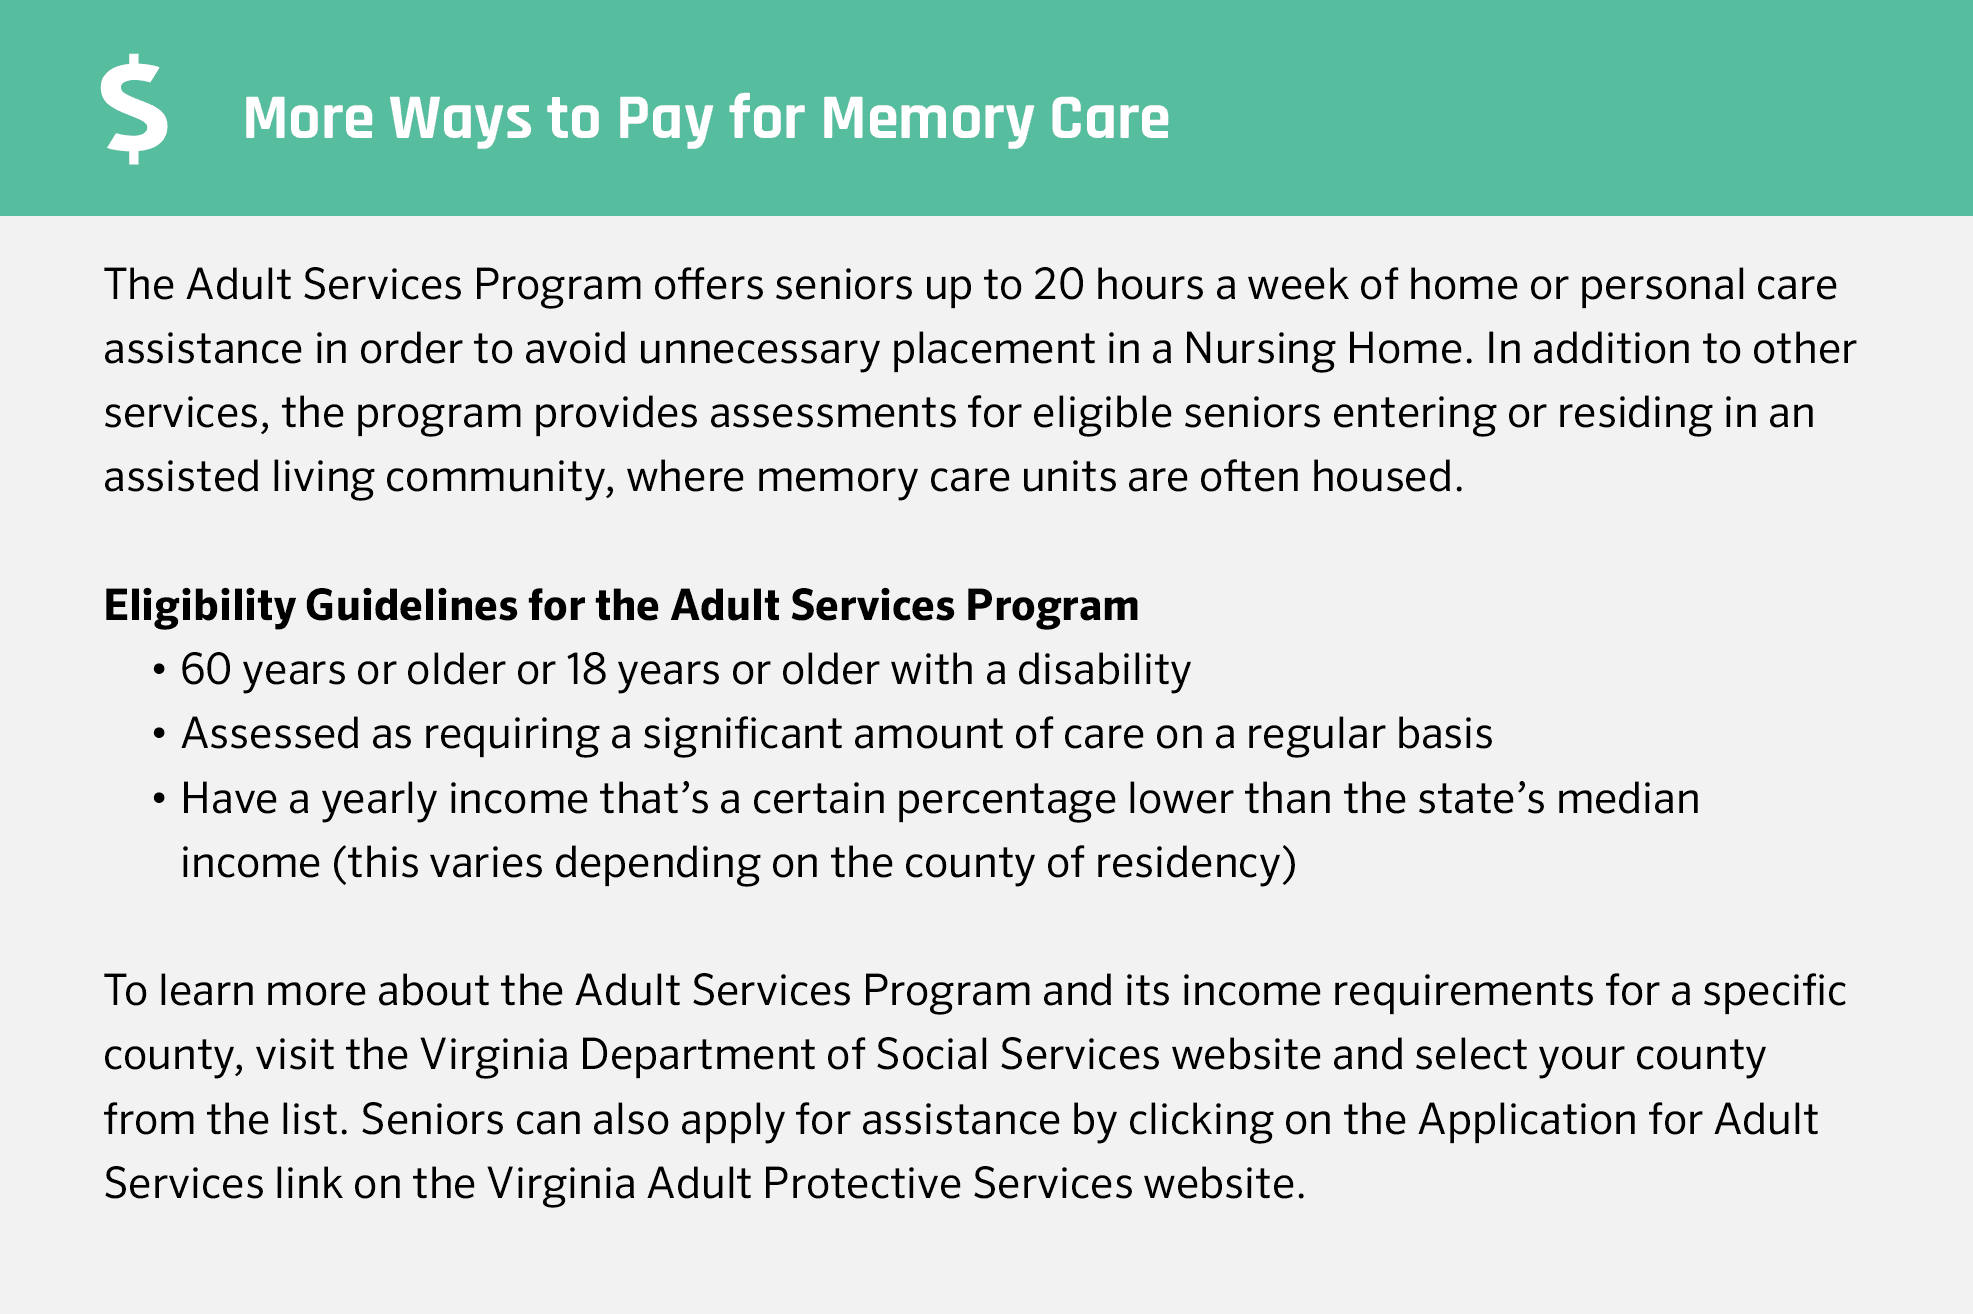 More ways o pay for memory care in Virginia